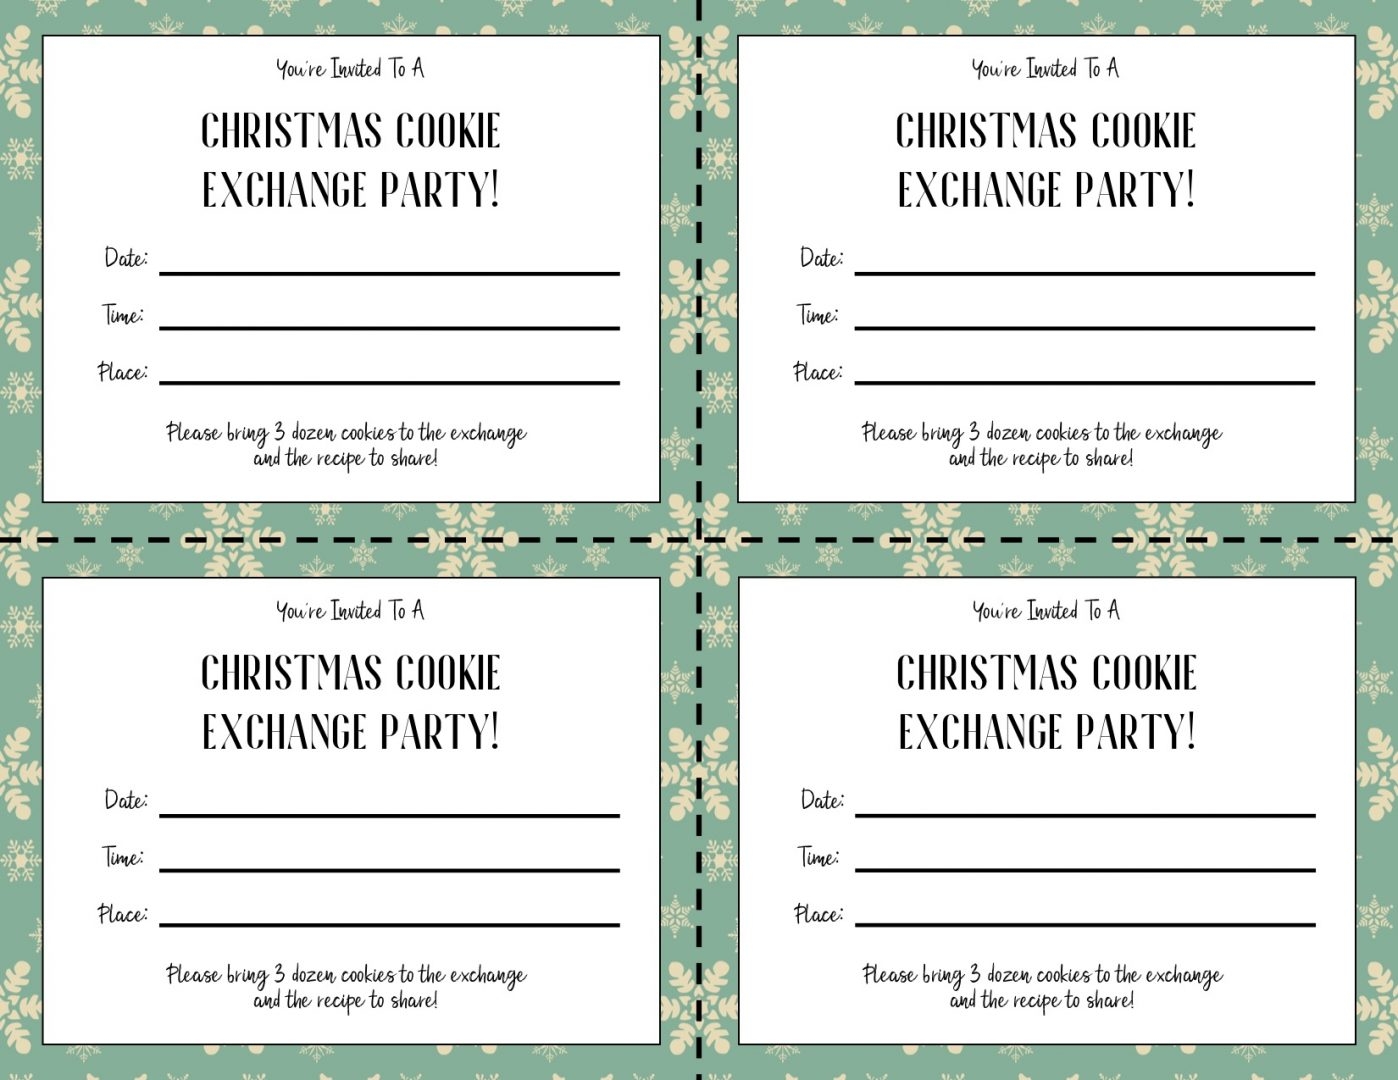 Hosting A Christmas Cookie Exchange With Free Printables Always Moving Mommy - Free Christmas Cookie Exchange Printable Invitation